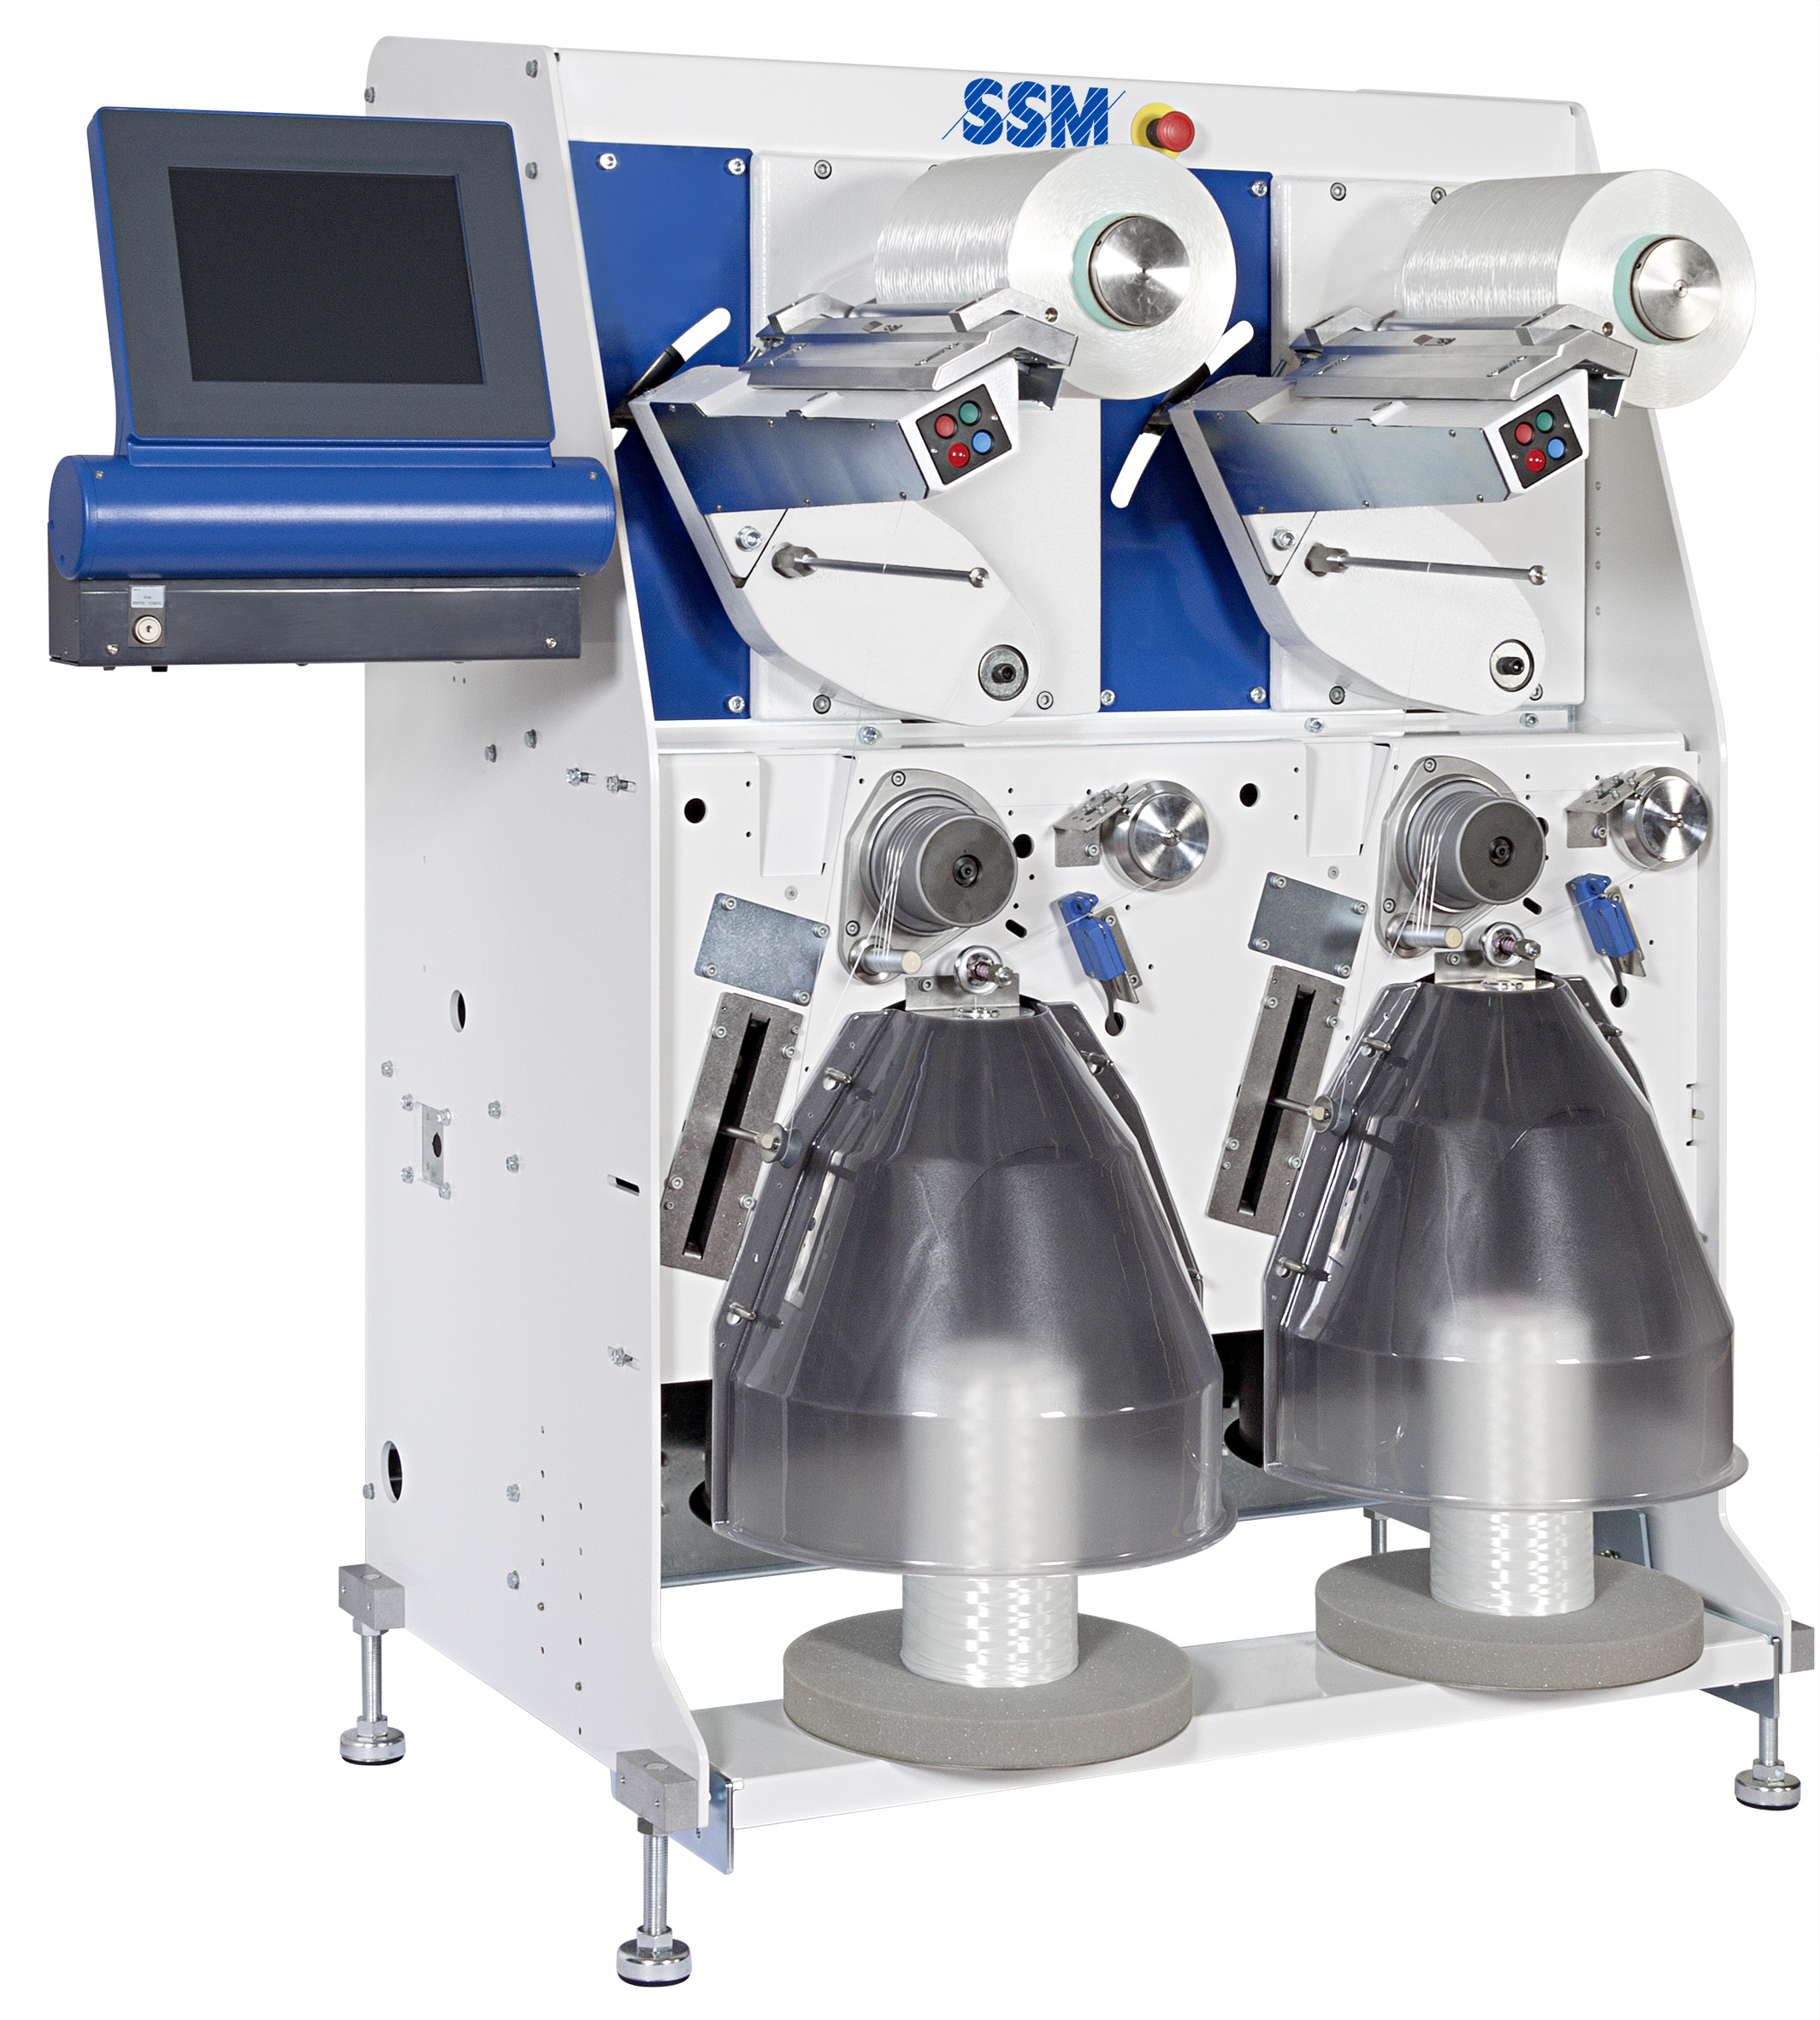 SSM DURO-TW precision package winder for technical yarns. © SSM AG